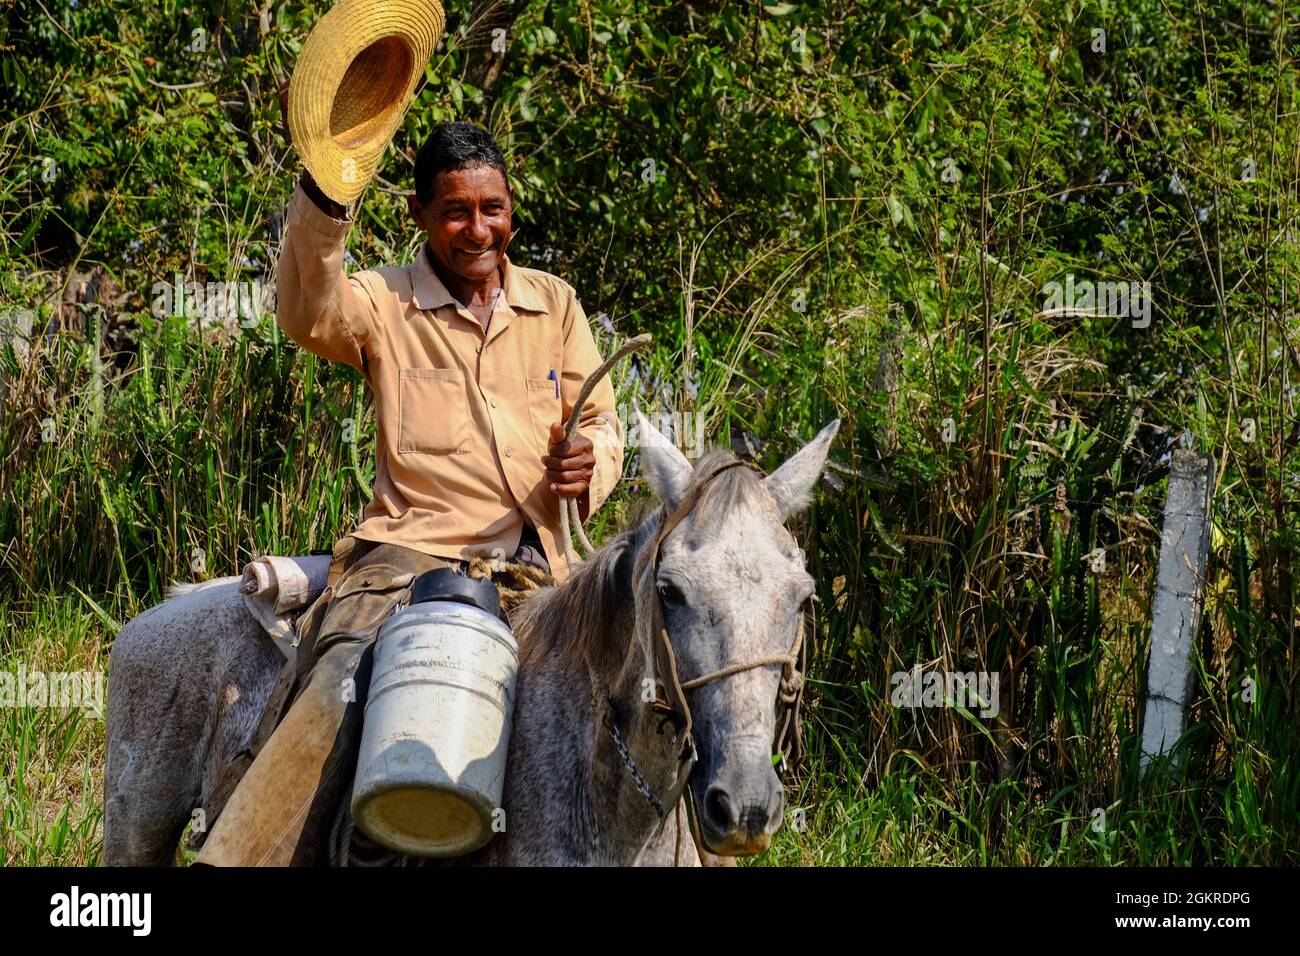 A cowboy on a mule waves his straw hat, Arimao, Cuba, West Indies, Central America Stock Photo